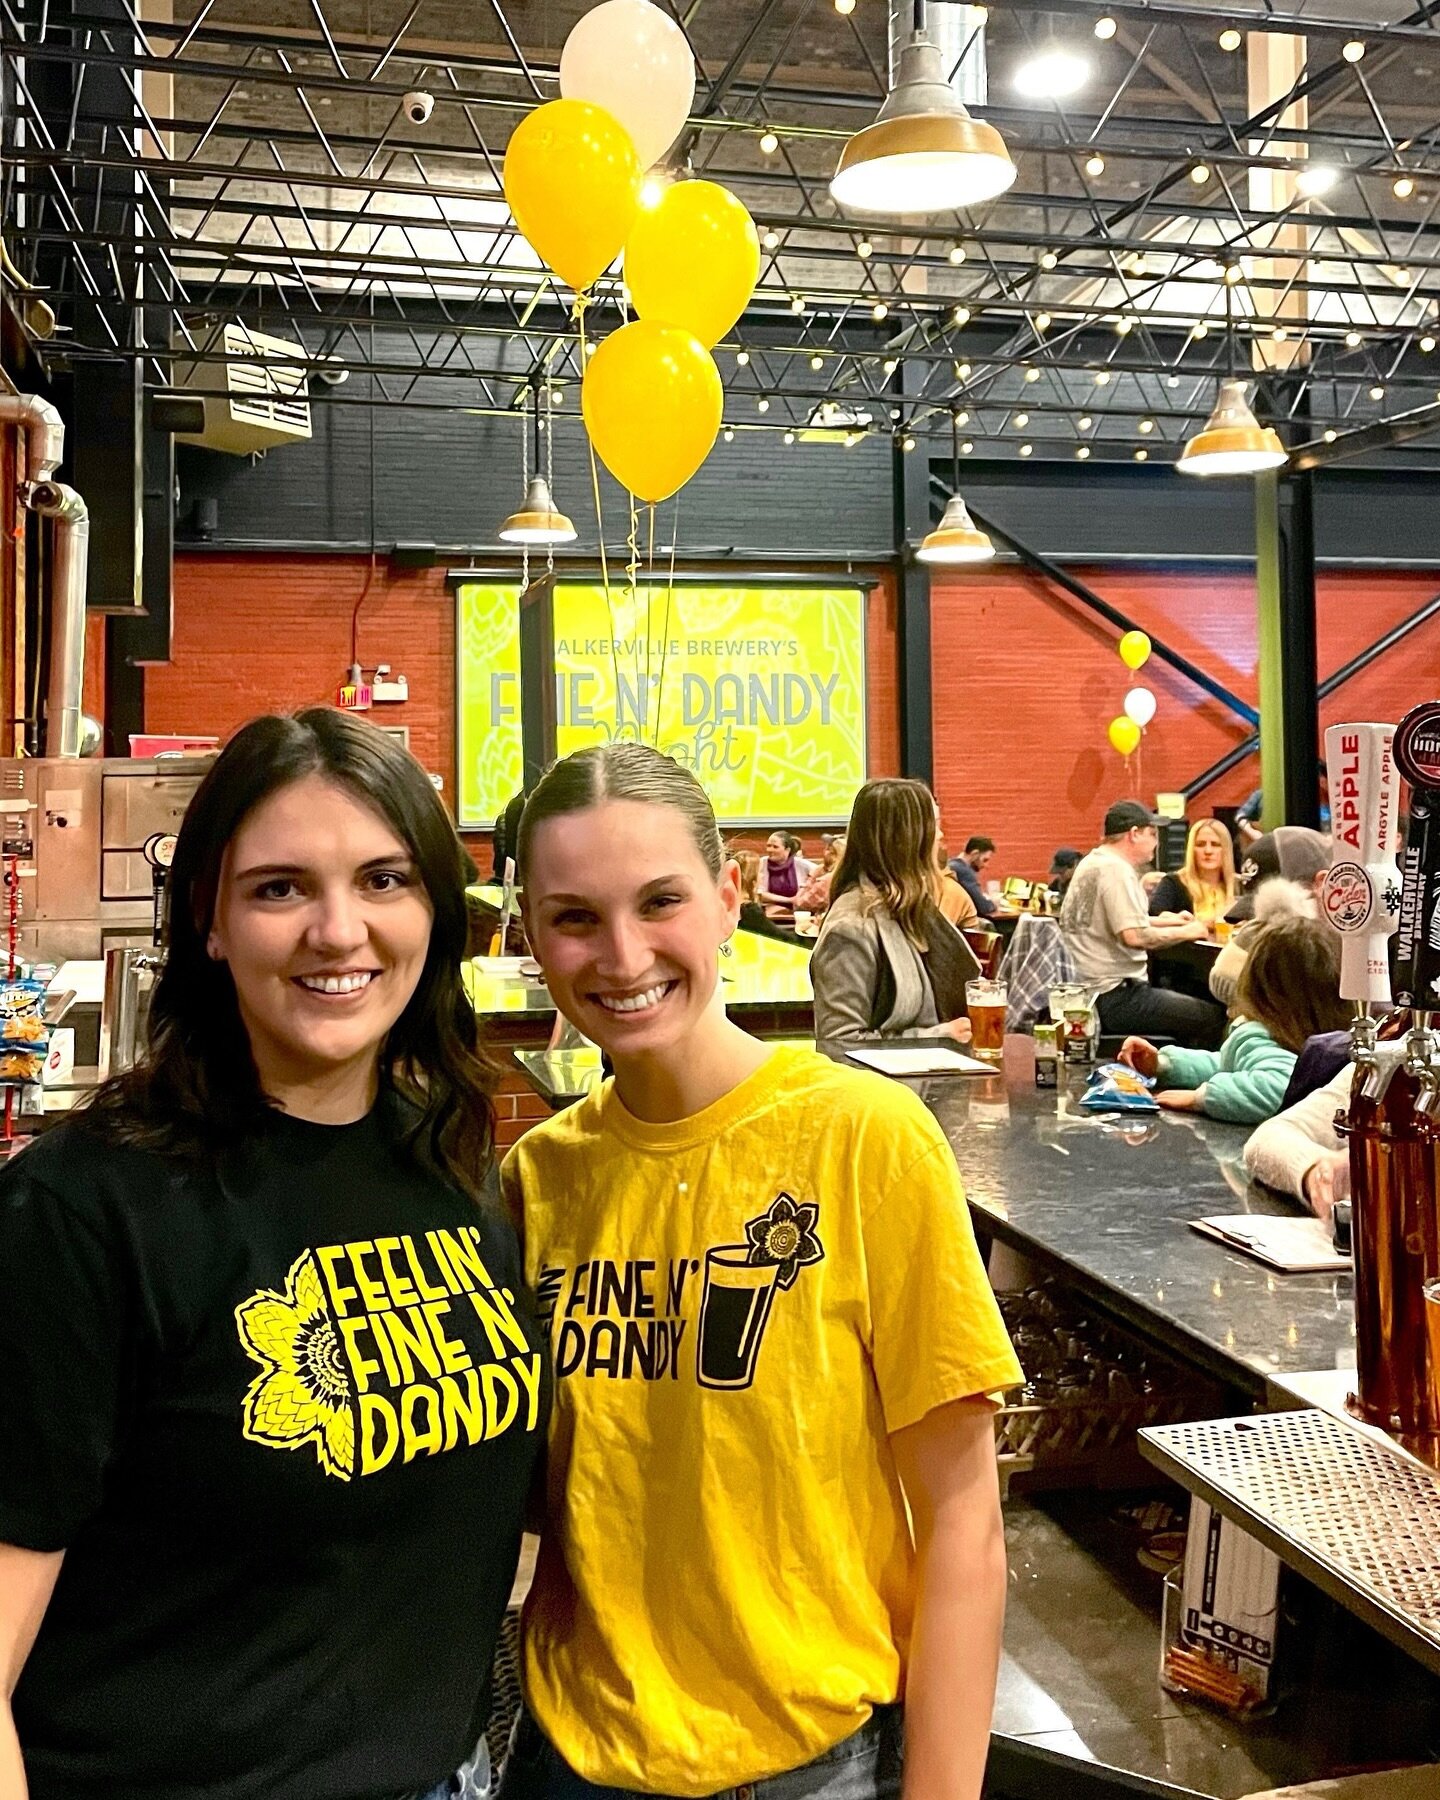 Join us to kick off 💛 FINE N&rsquo; DANDY MONTH! 💛

Friday, April 5th we&rsquo;ll be hosting our Annual Fine N&rsquo; Dandy Night in support of Windsor Cancer Foundation from 5-10pm!

Come by and enjoy:
💛 Fine N&rsquo; Dandy Dandelion Infused Unfi